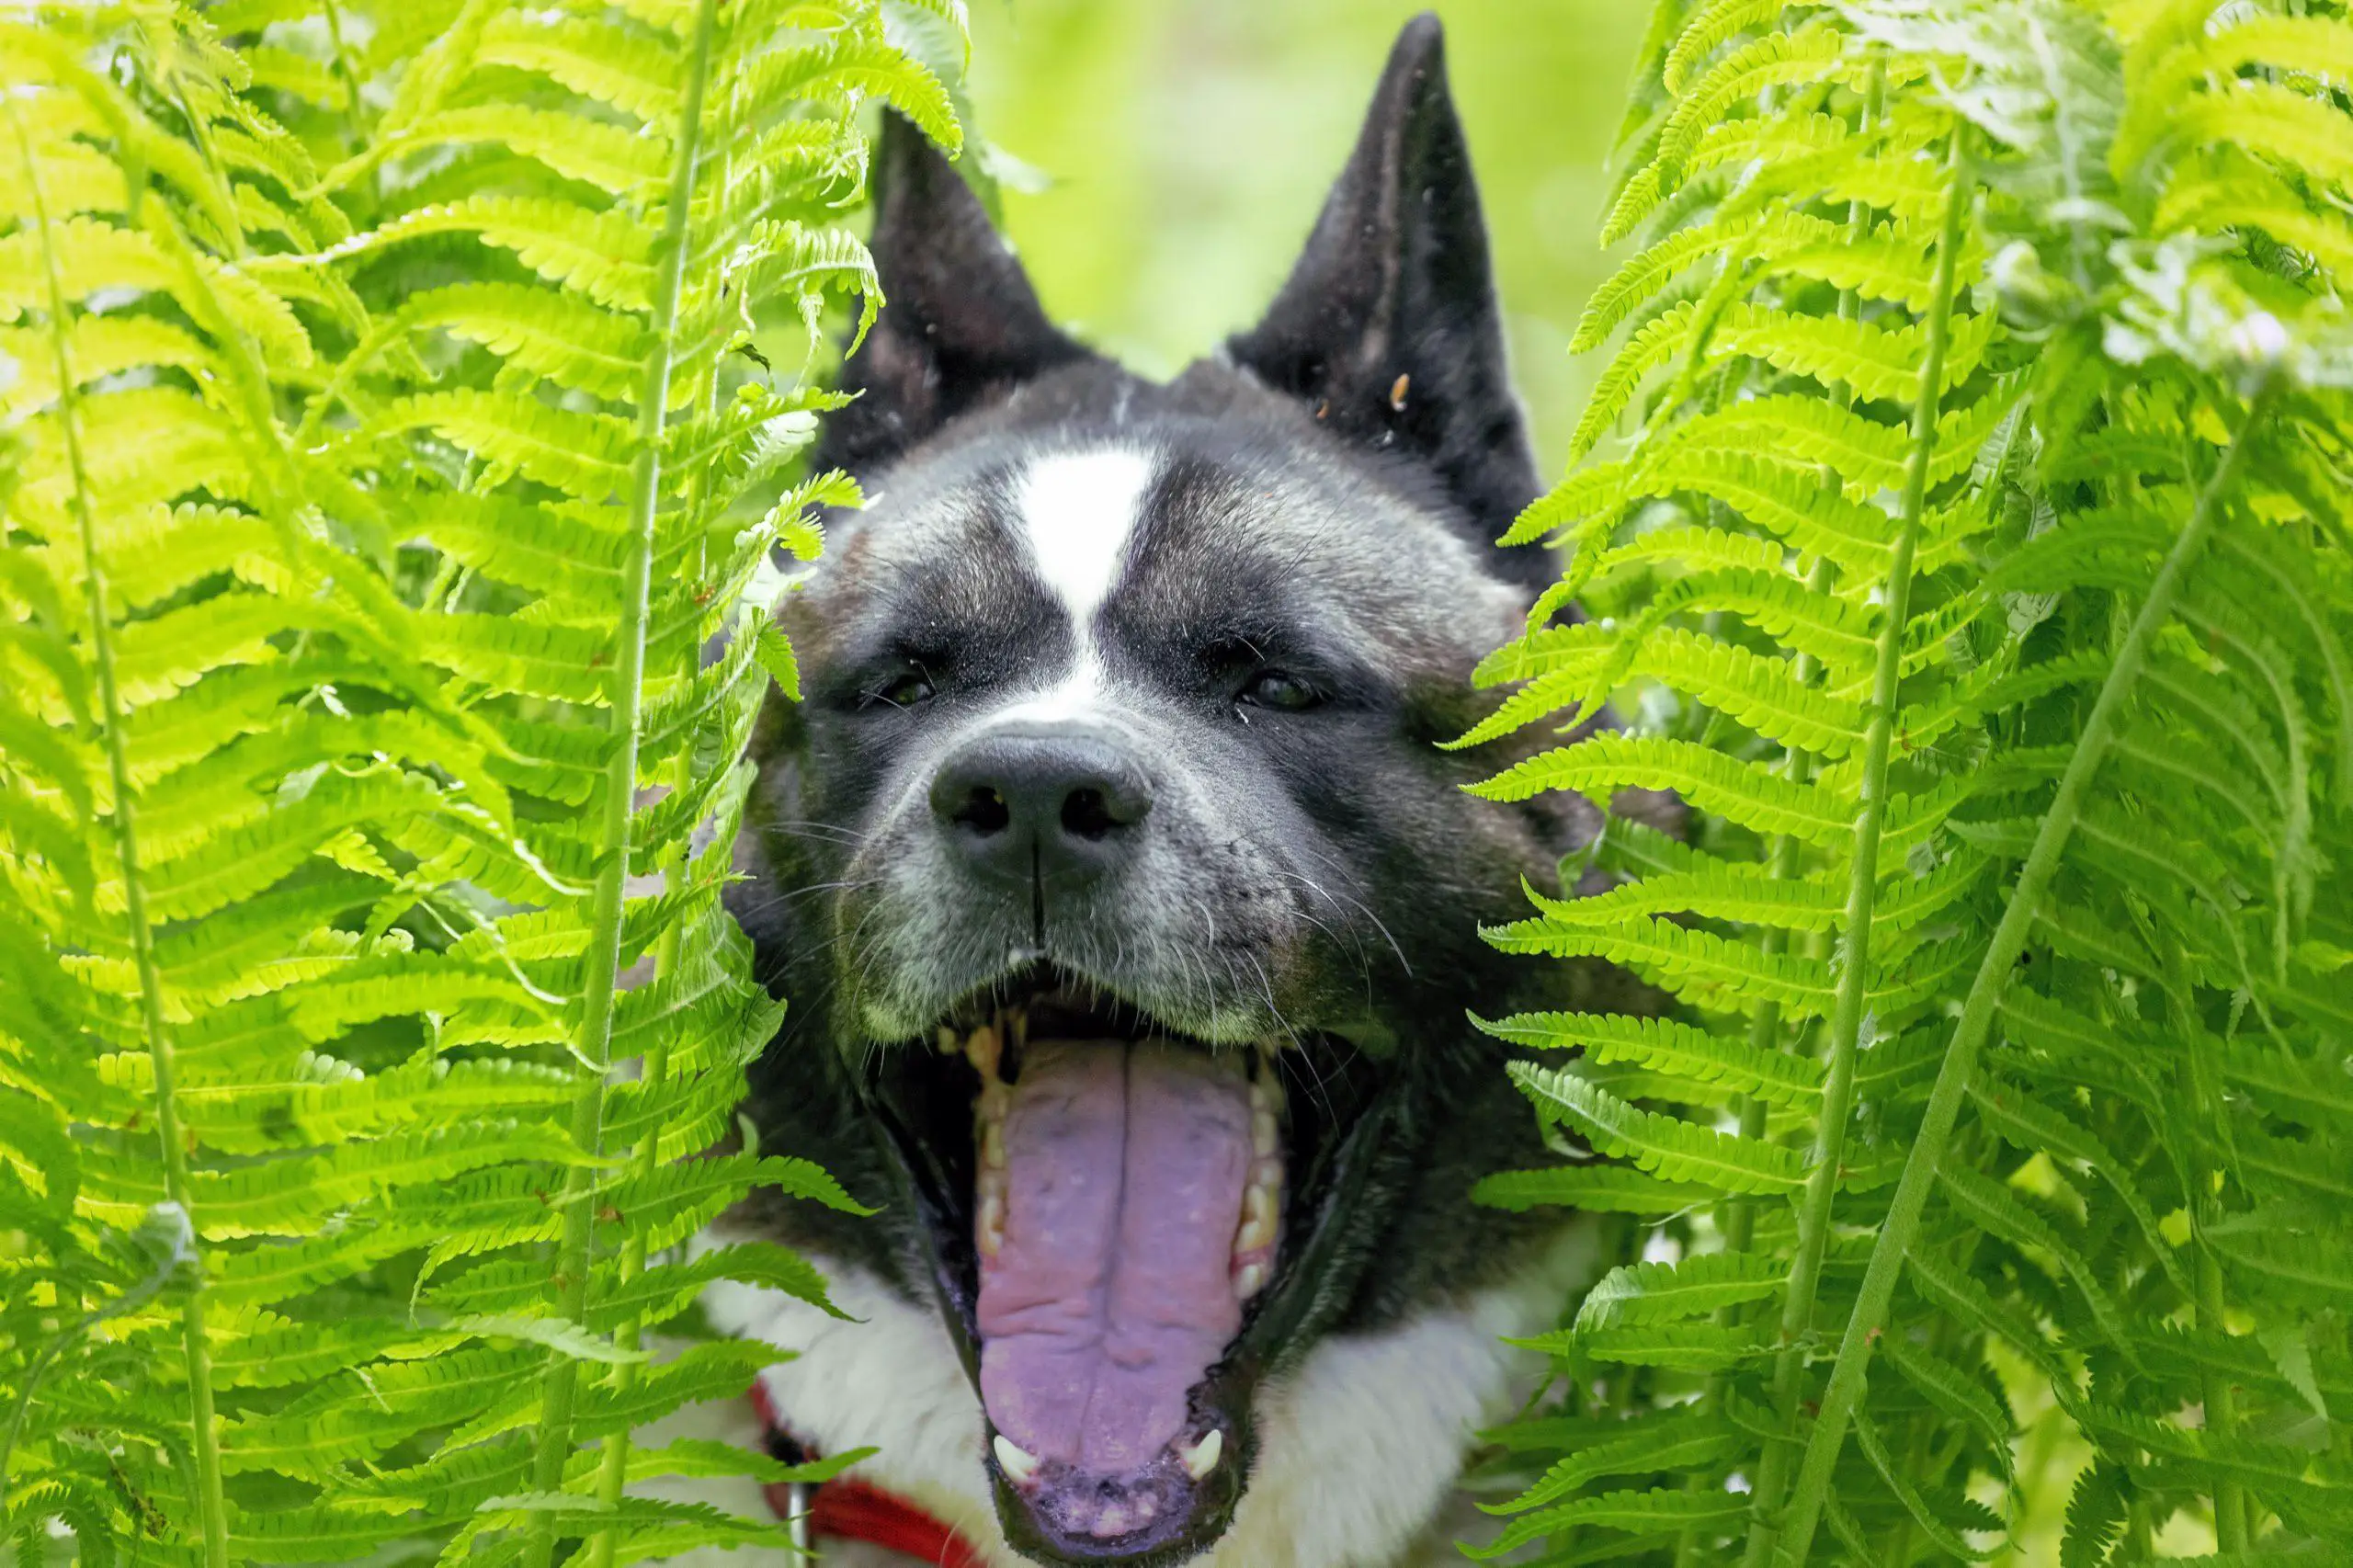 Portrait of a smiling dog surrounded by green fern leaves